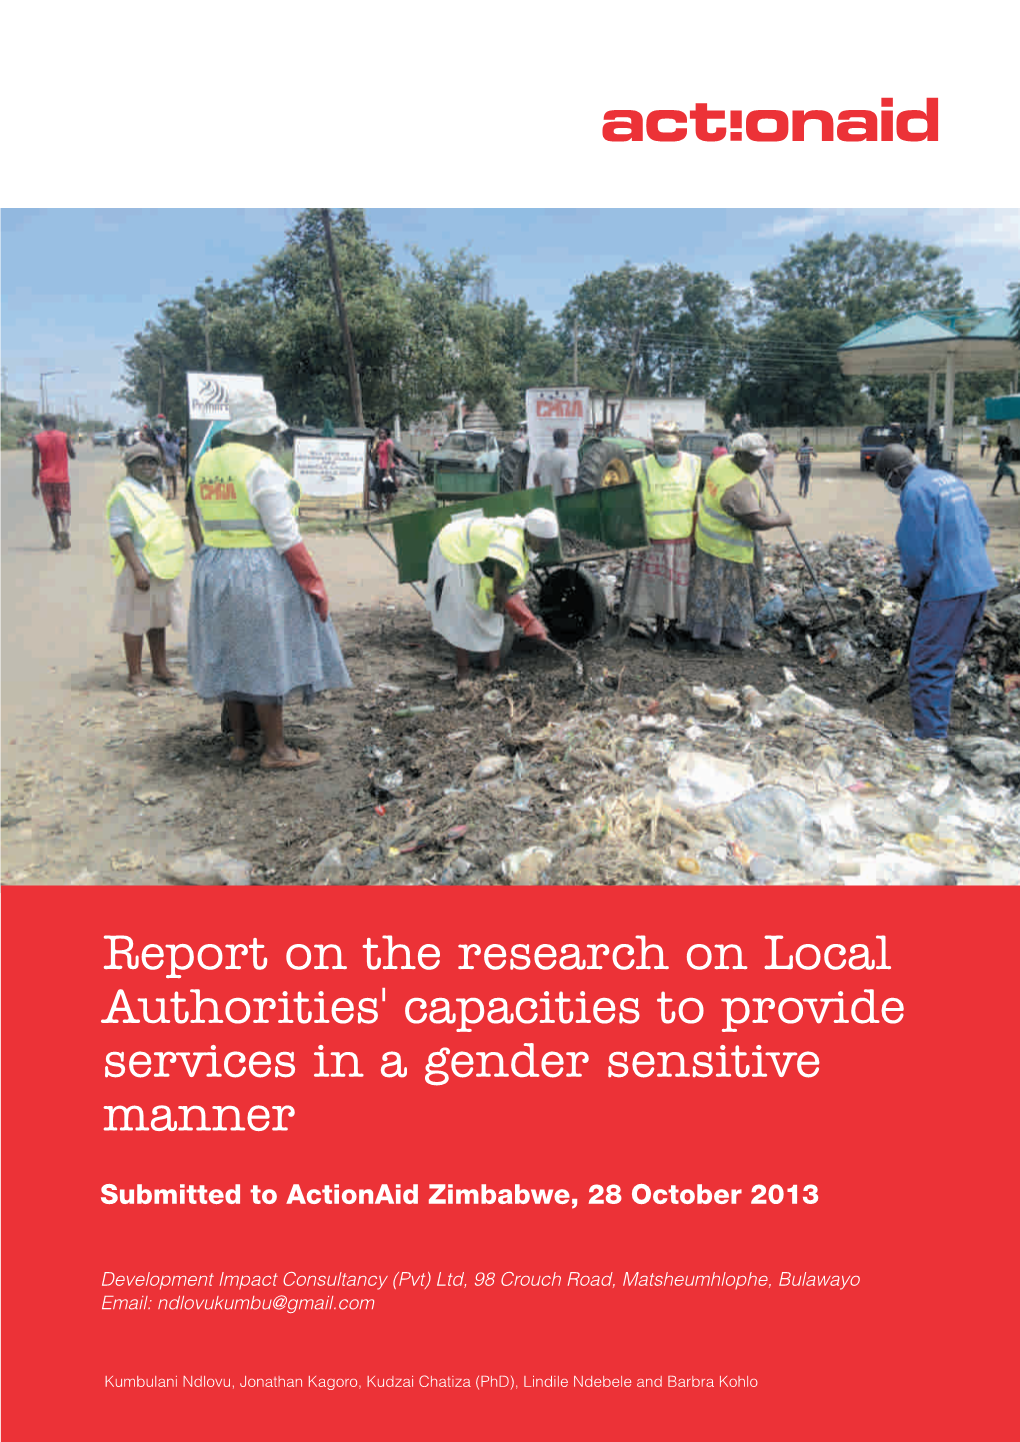 Report on the Research on Local Authorities' Capacities to Provide